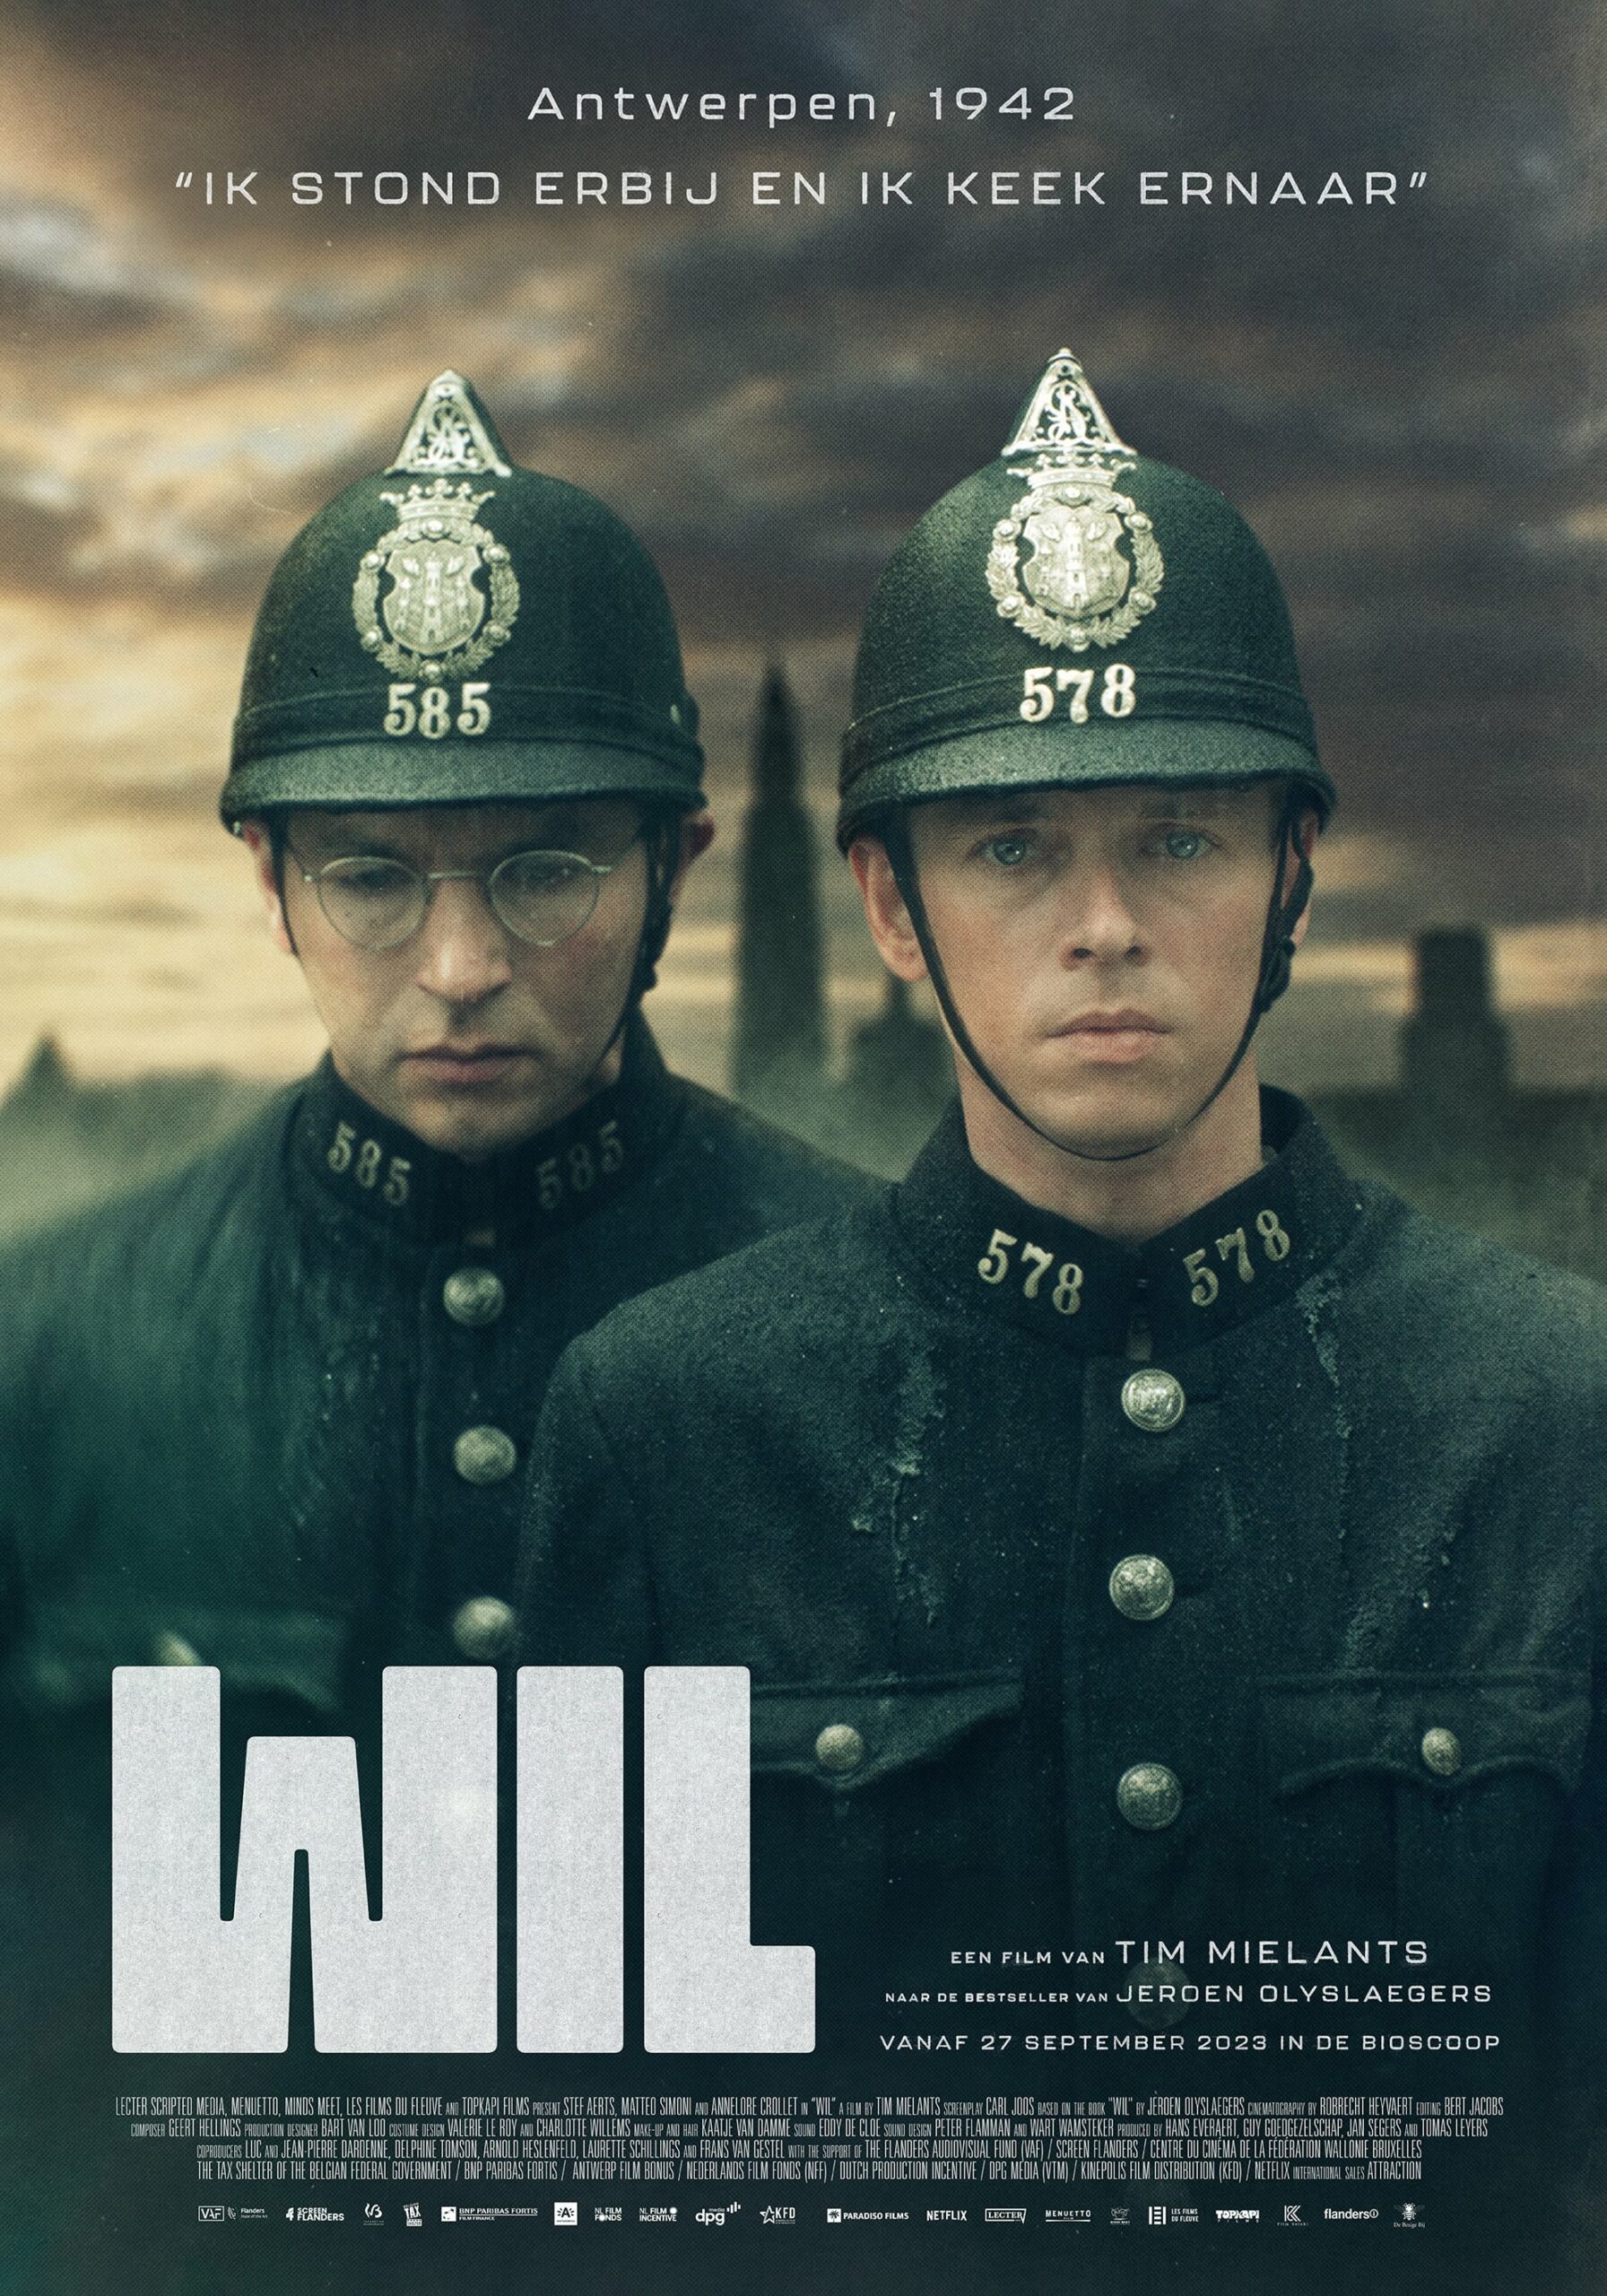 Poster for the movie "Wil"